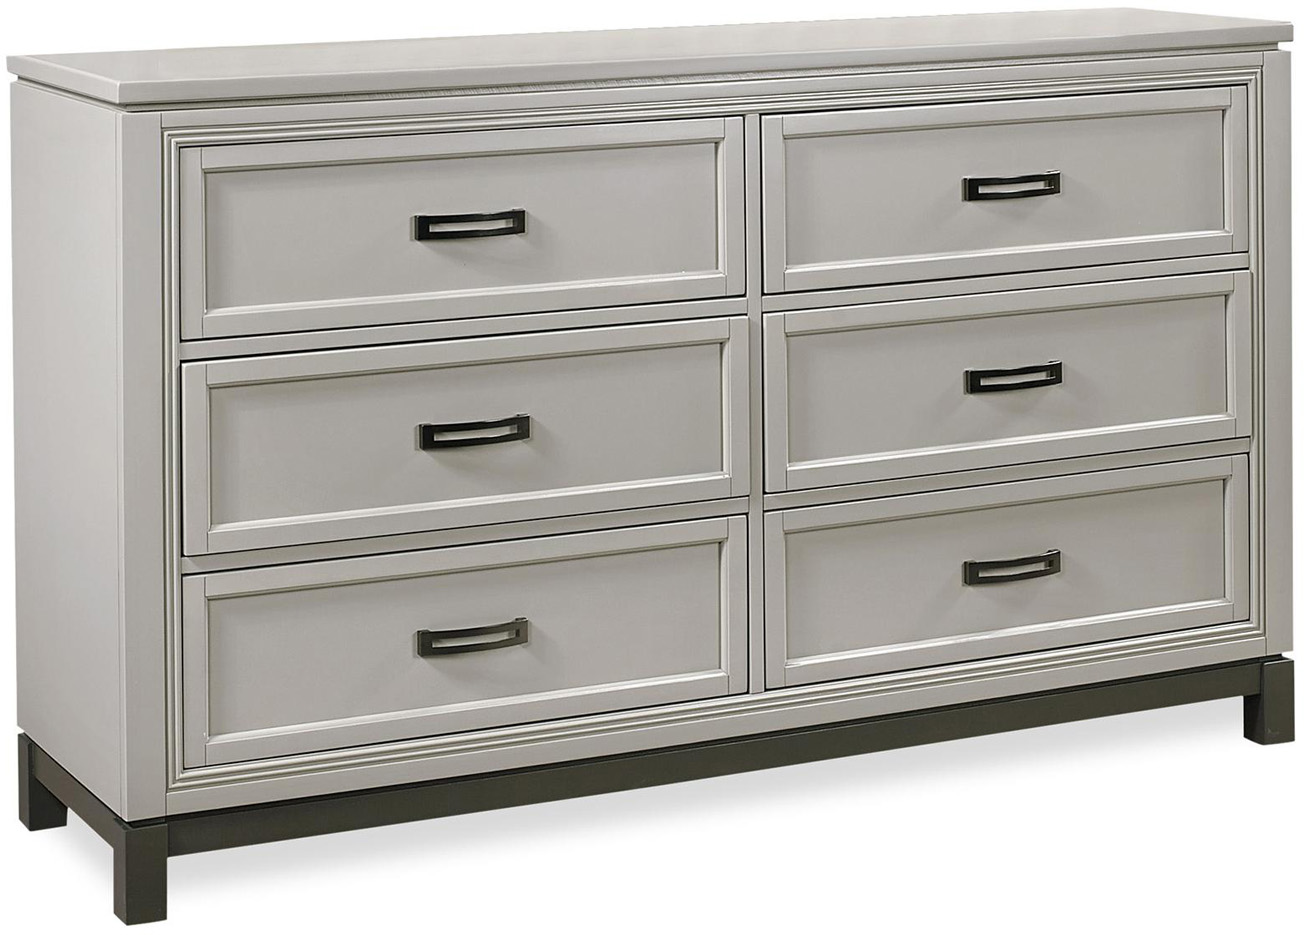 Hyde Park Dresser in the Gray Paint finish